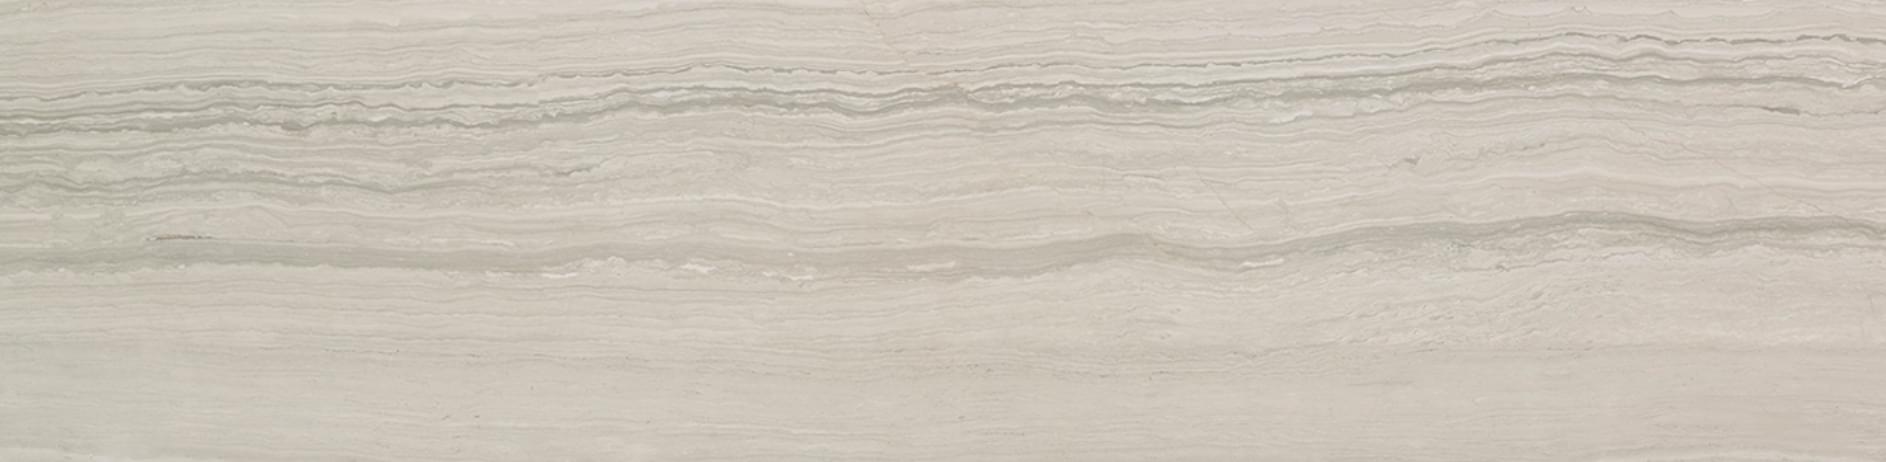 LAntic Colonial Natural Stone Silver Wood Classico Bioprot 10x60